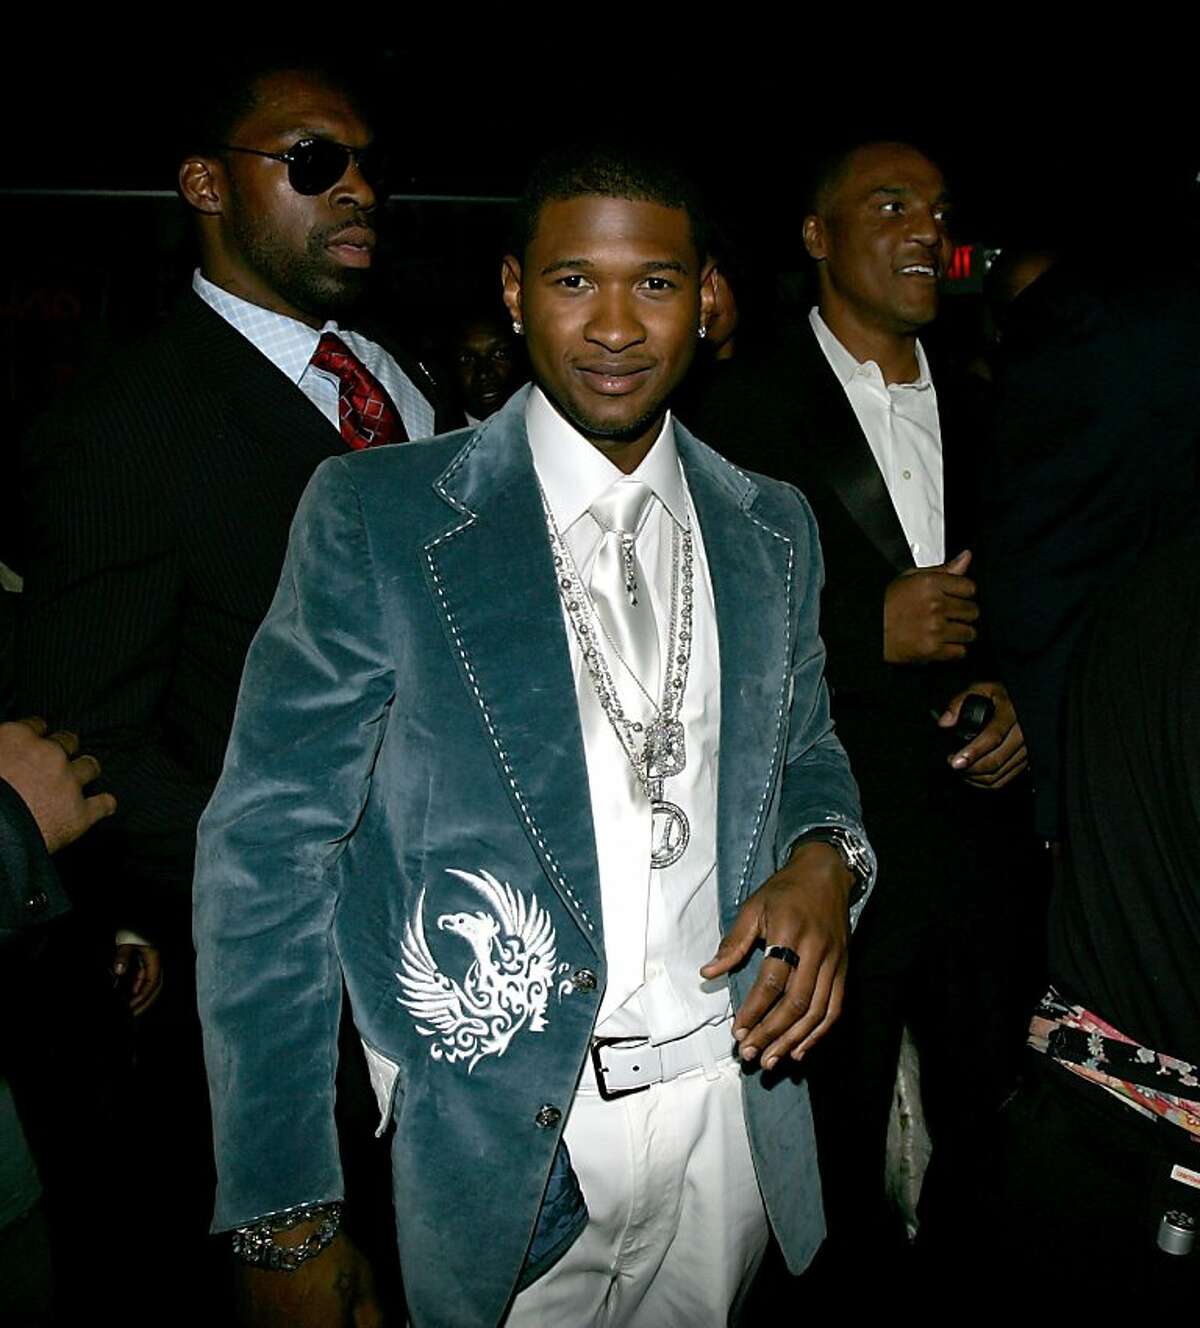 HOLLYWOOD - FEBRUARY 13: Usher (C) attends Usher's Private Grammy Party hosted by Entertainment Weekly held at the Geisha House on February 13, 2005 in Hollywood, California. (Photo by Frank Micelotta/Getty Images)